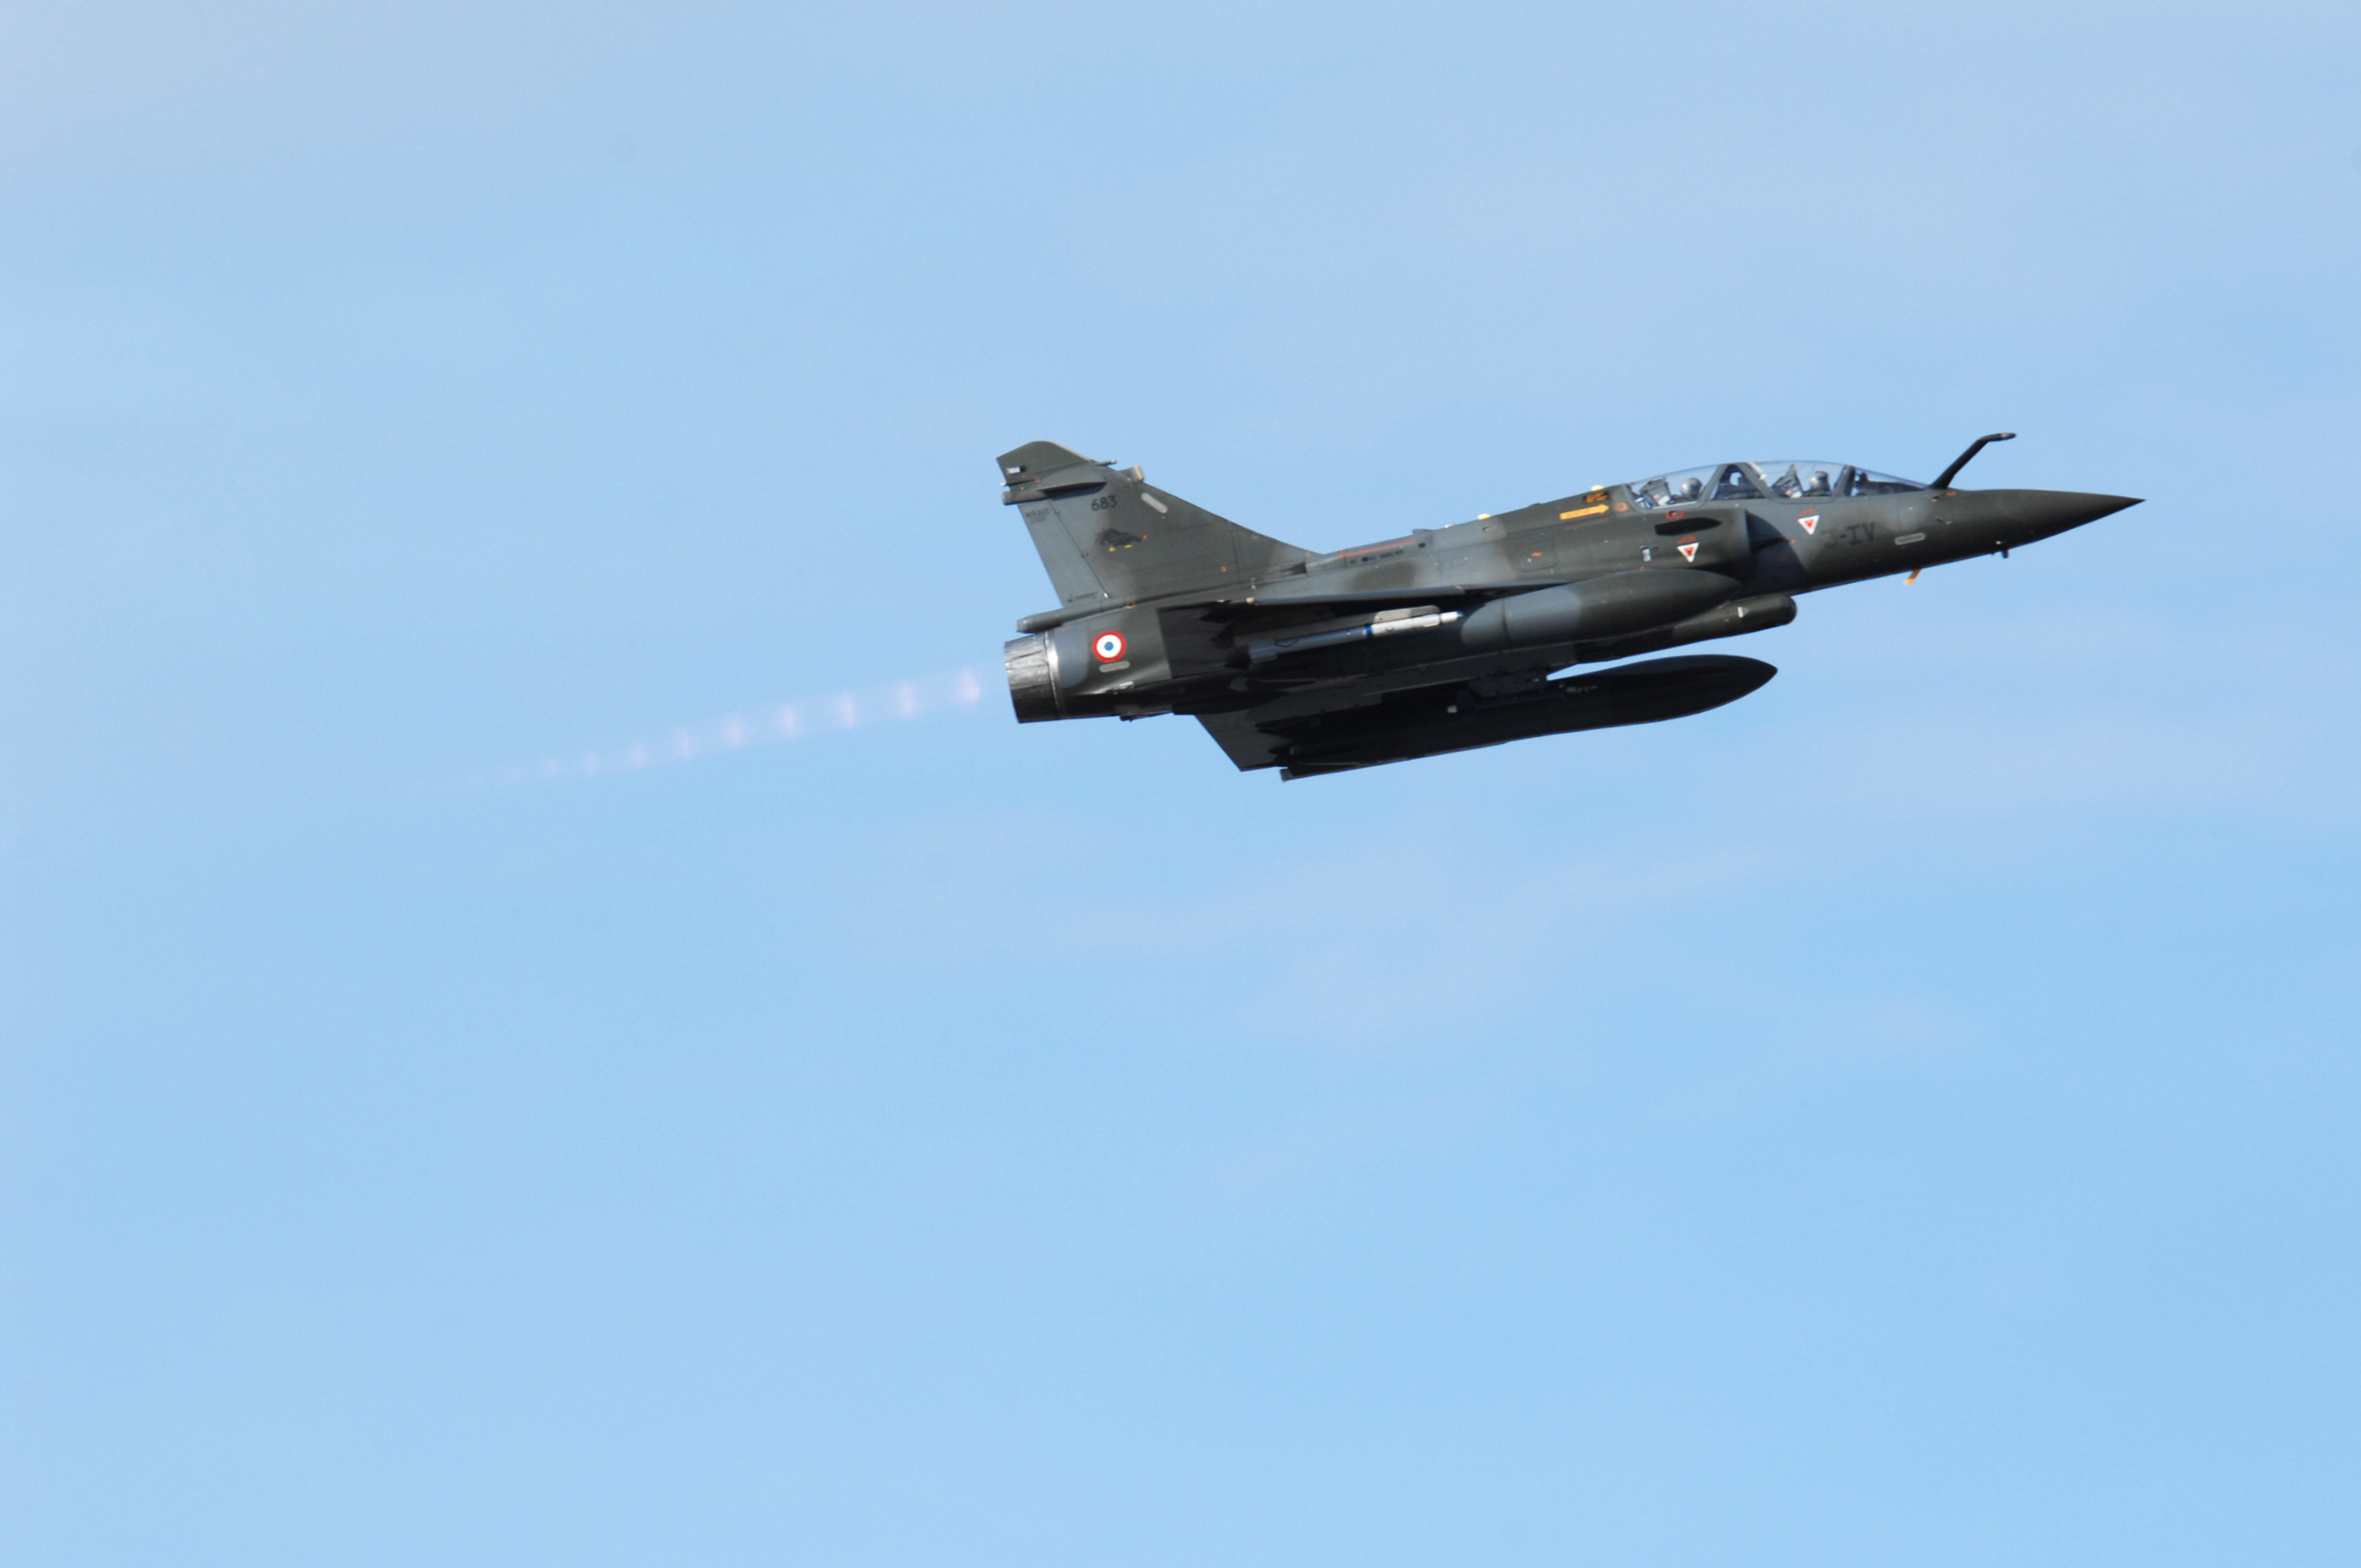 France Is Considering Transferring Mirage 2000C Fighter Jets To Ukraine